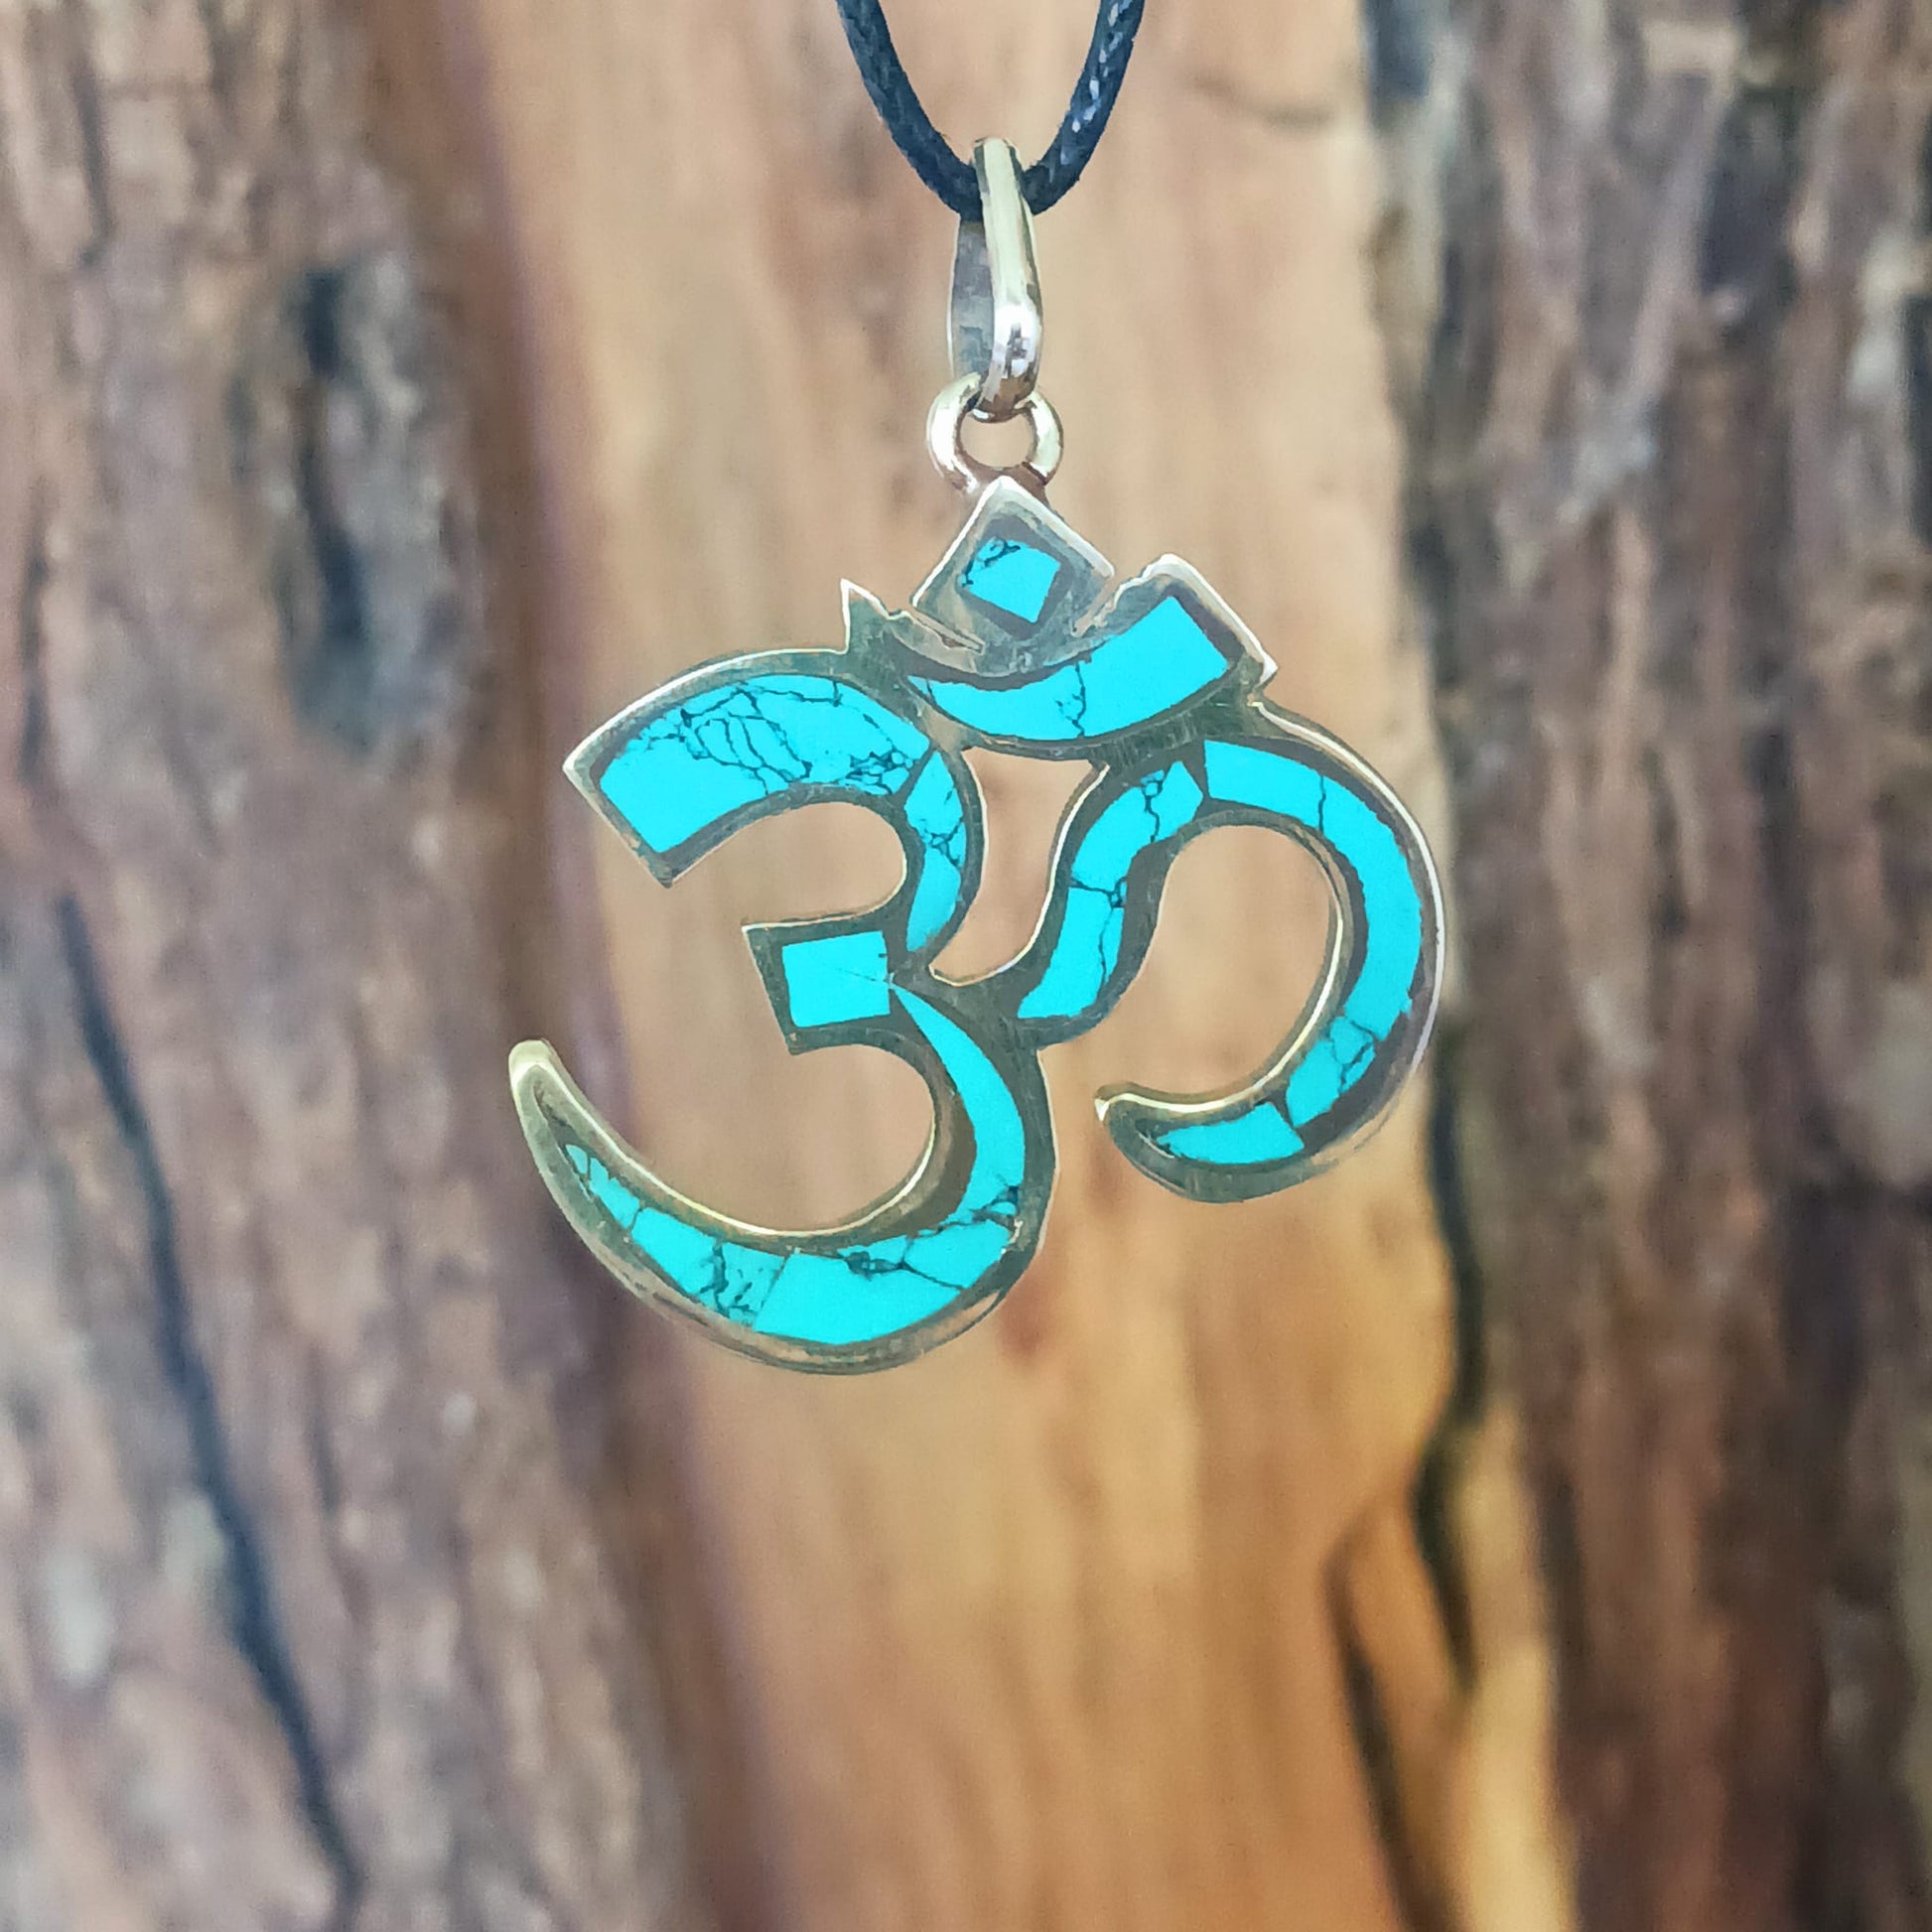 Om Brass and Turquoise Om Pendant 3.5 x 3 cm